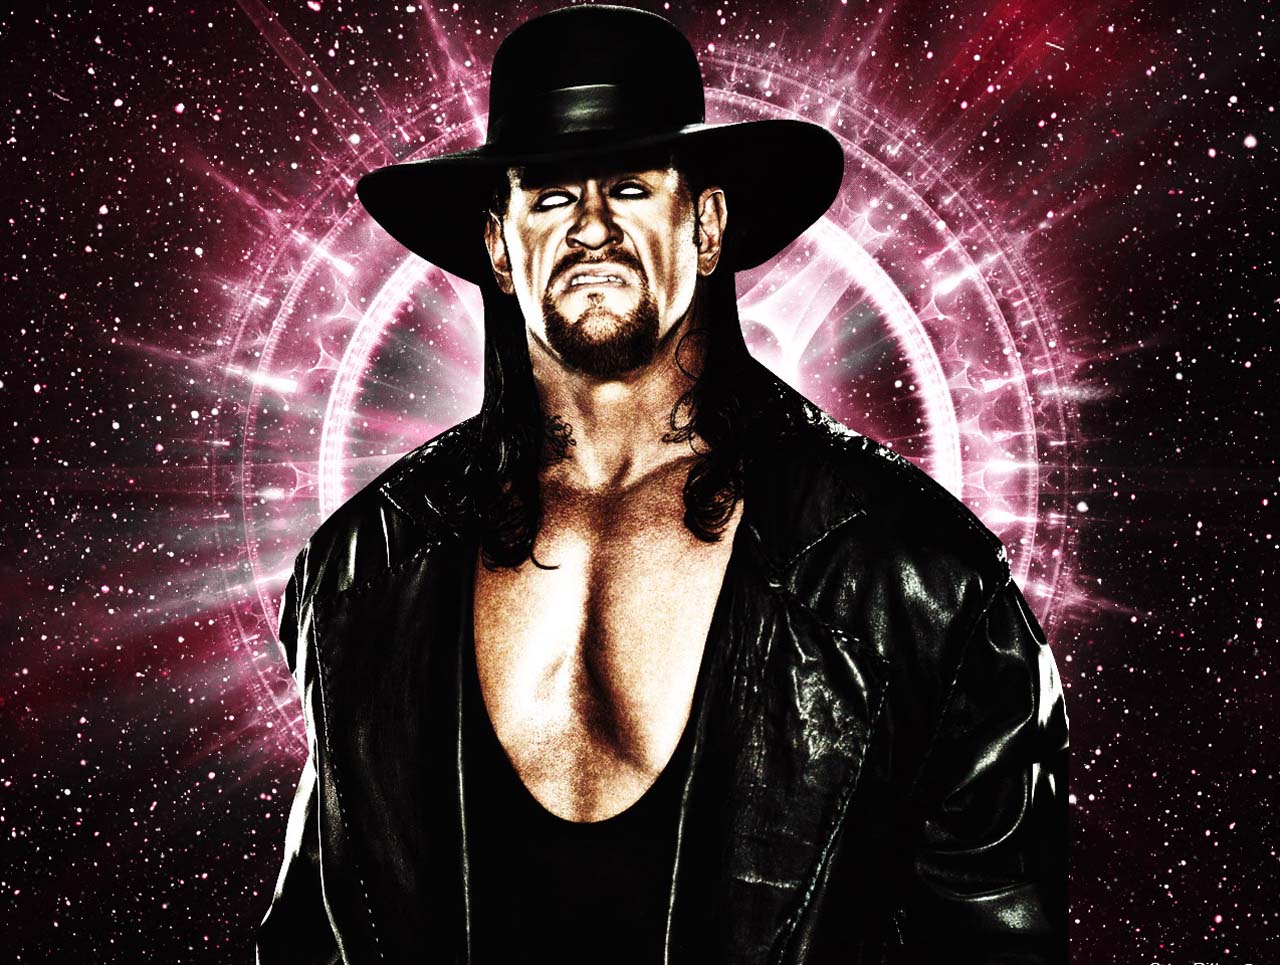 The Undertaker HD Wallpapers 2016 Gallery - Daily Backgrounds in HD.